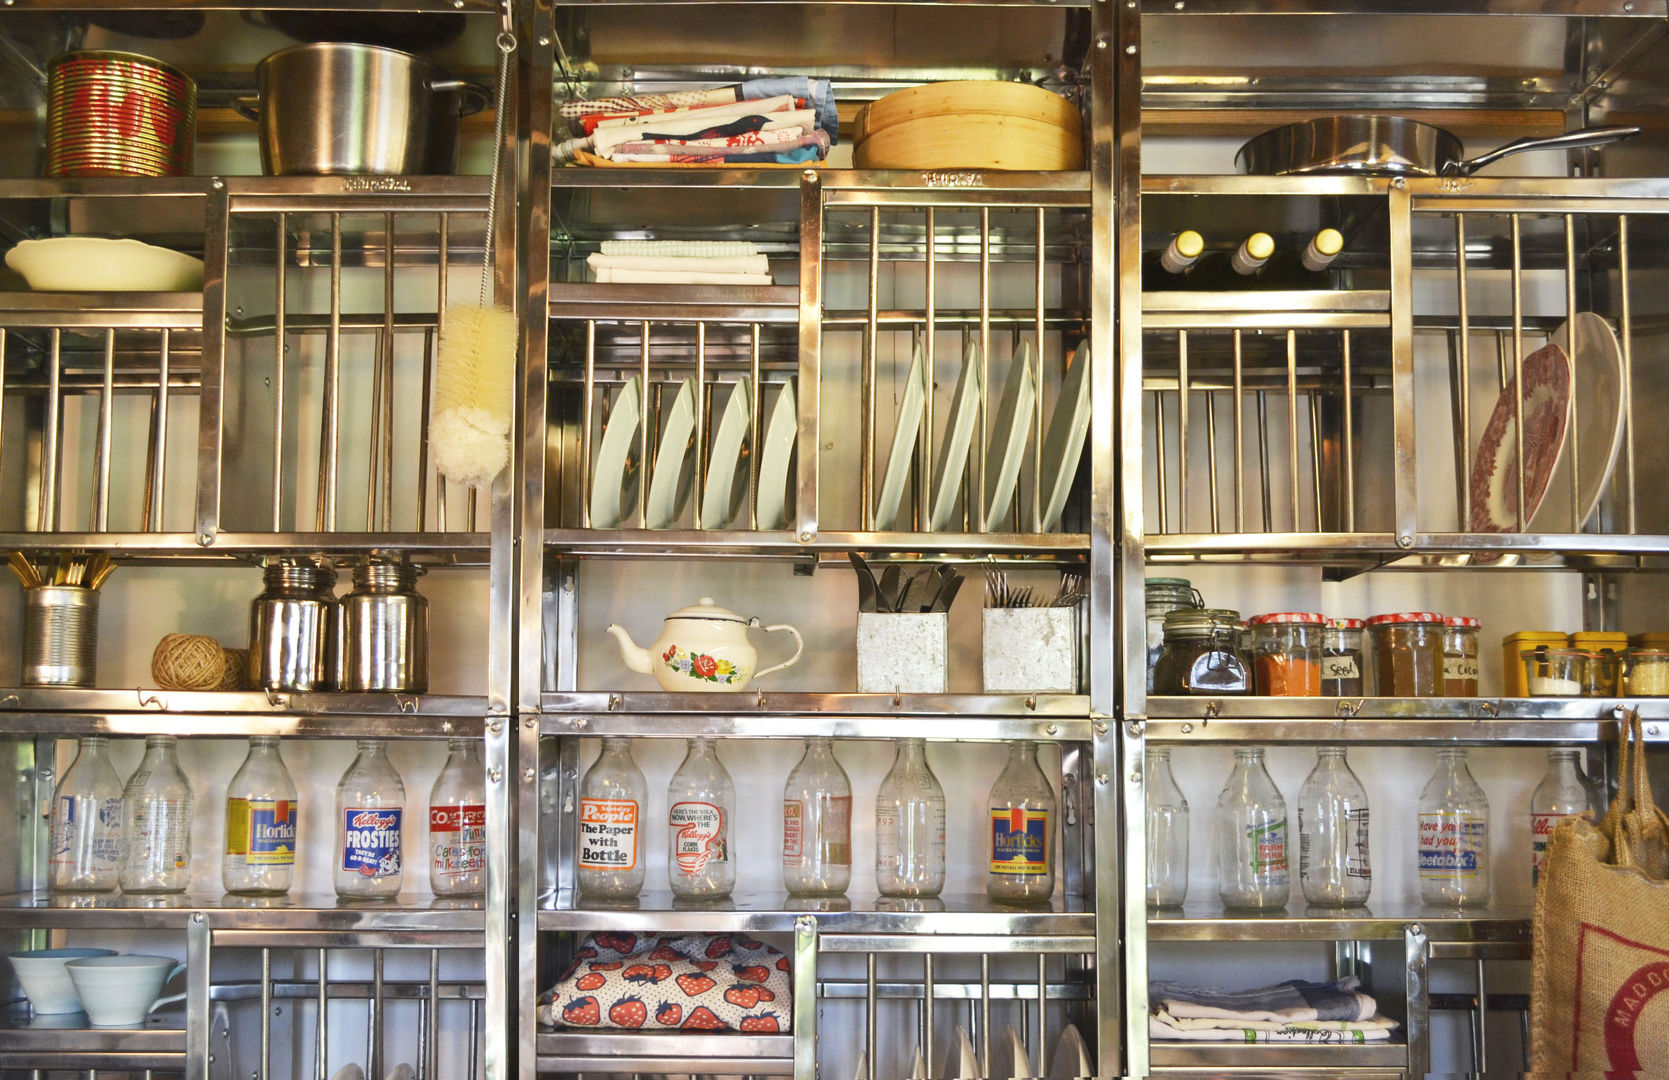 Stainless steel plate racks, The Plate Rack The Plate Rack Industrial style kitchen Cabinets & shelves